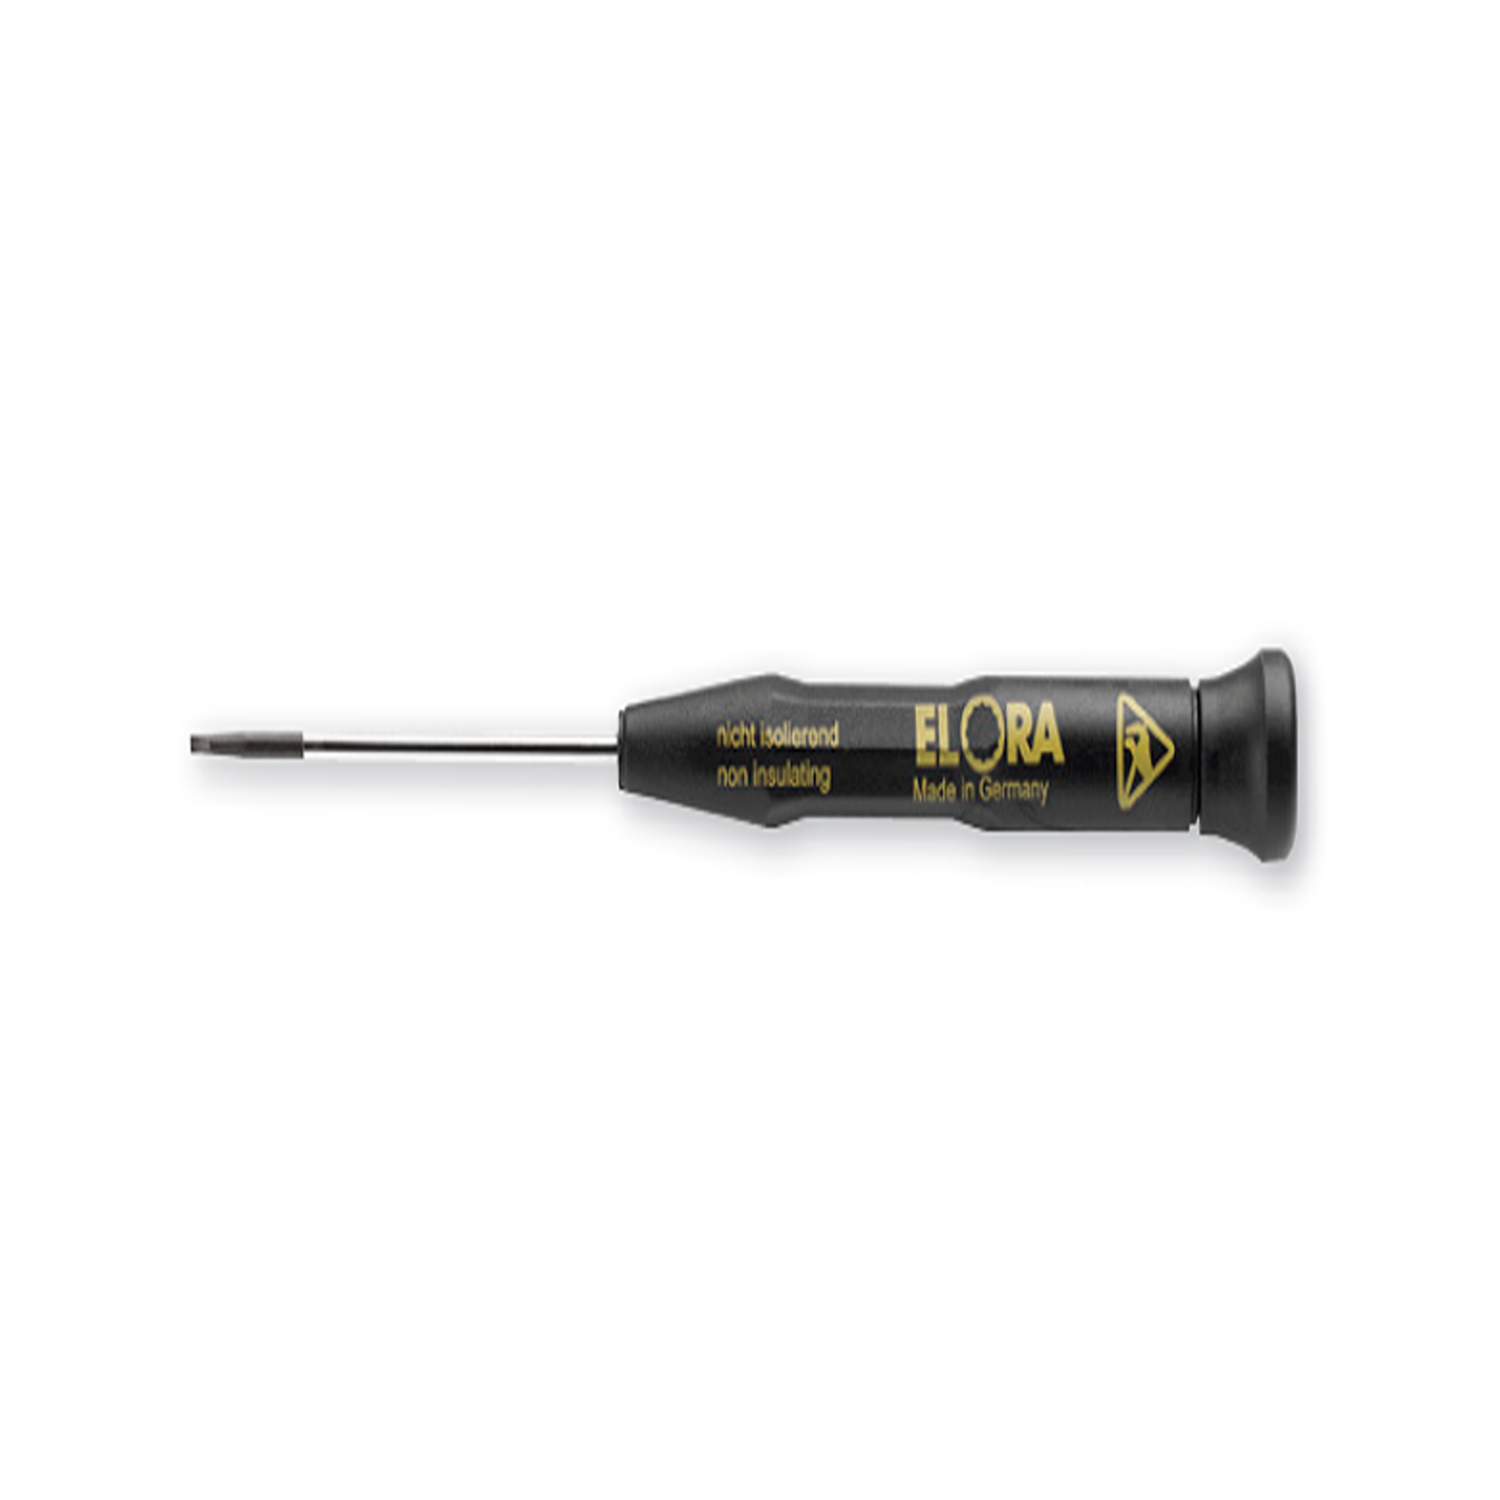 ELORA 600-IS ESD Electronic Screwdriver ESD (ELORA Tools) - Premium Screwdriver from ELORA - Shop now at Yew Aik.